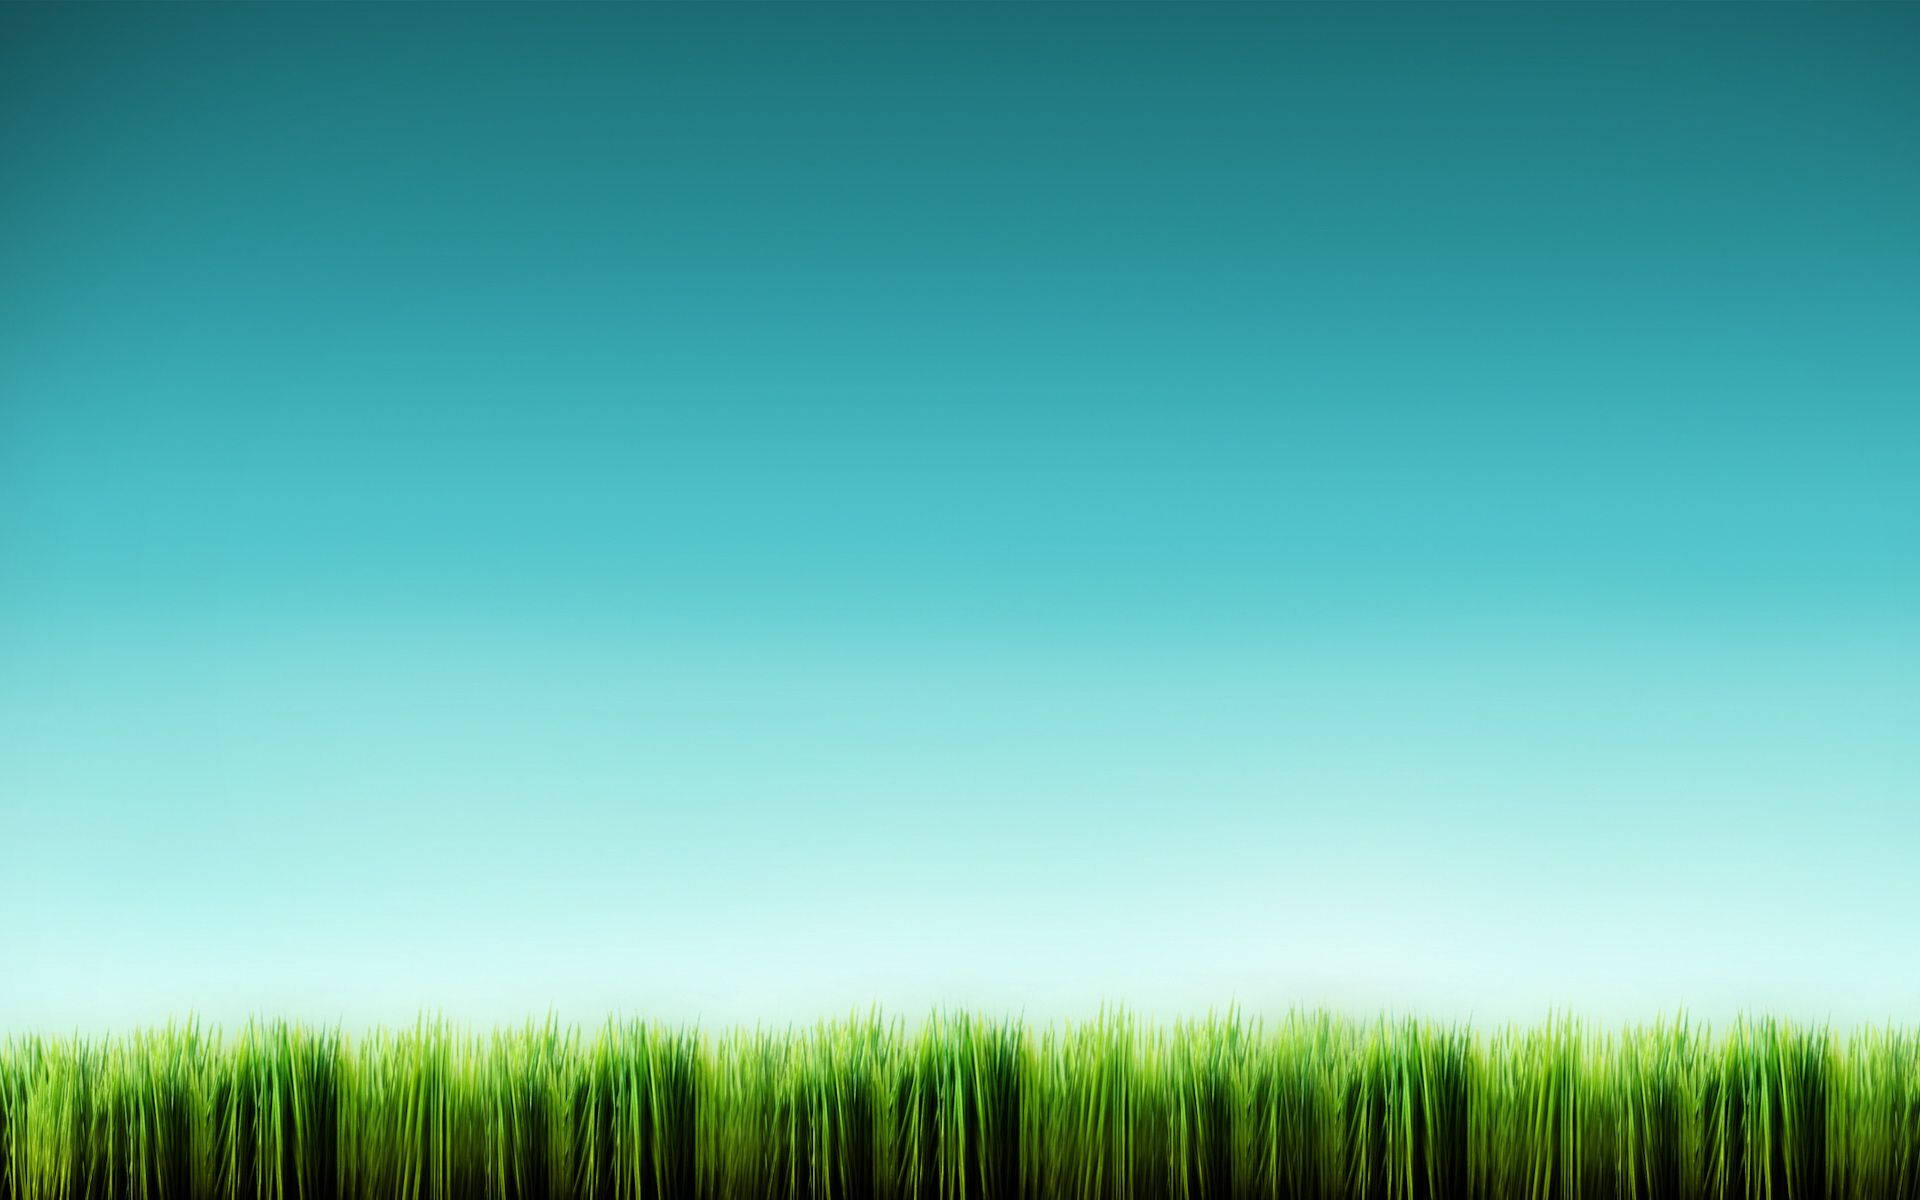 Find solace in the tranquil beauty of a grassy meadow. Wallpaper